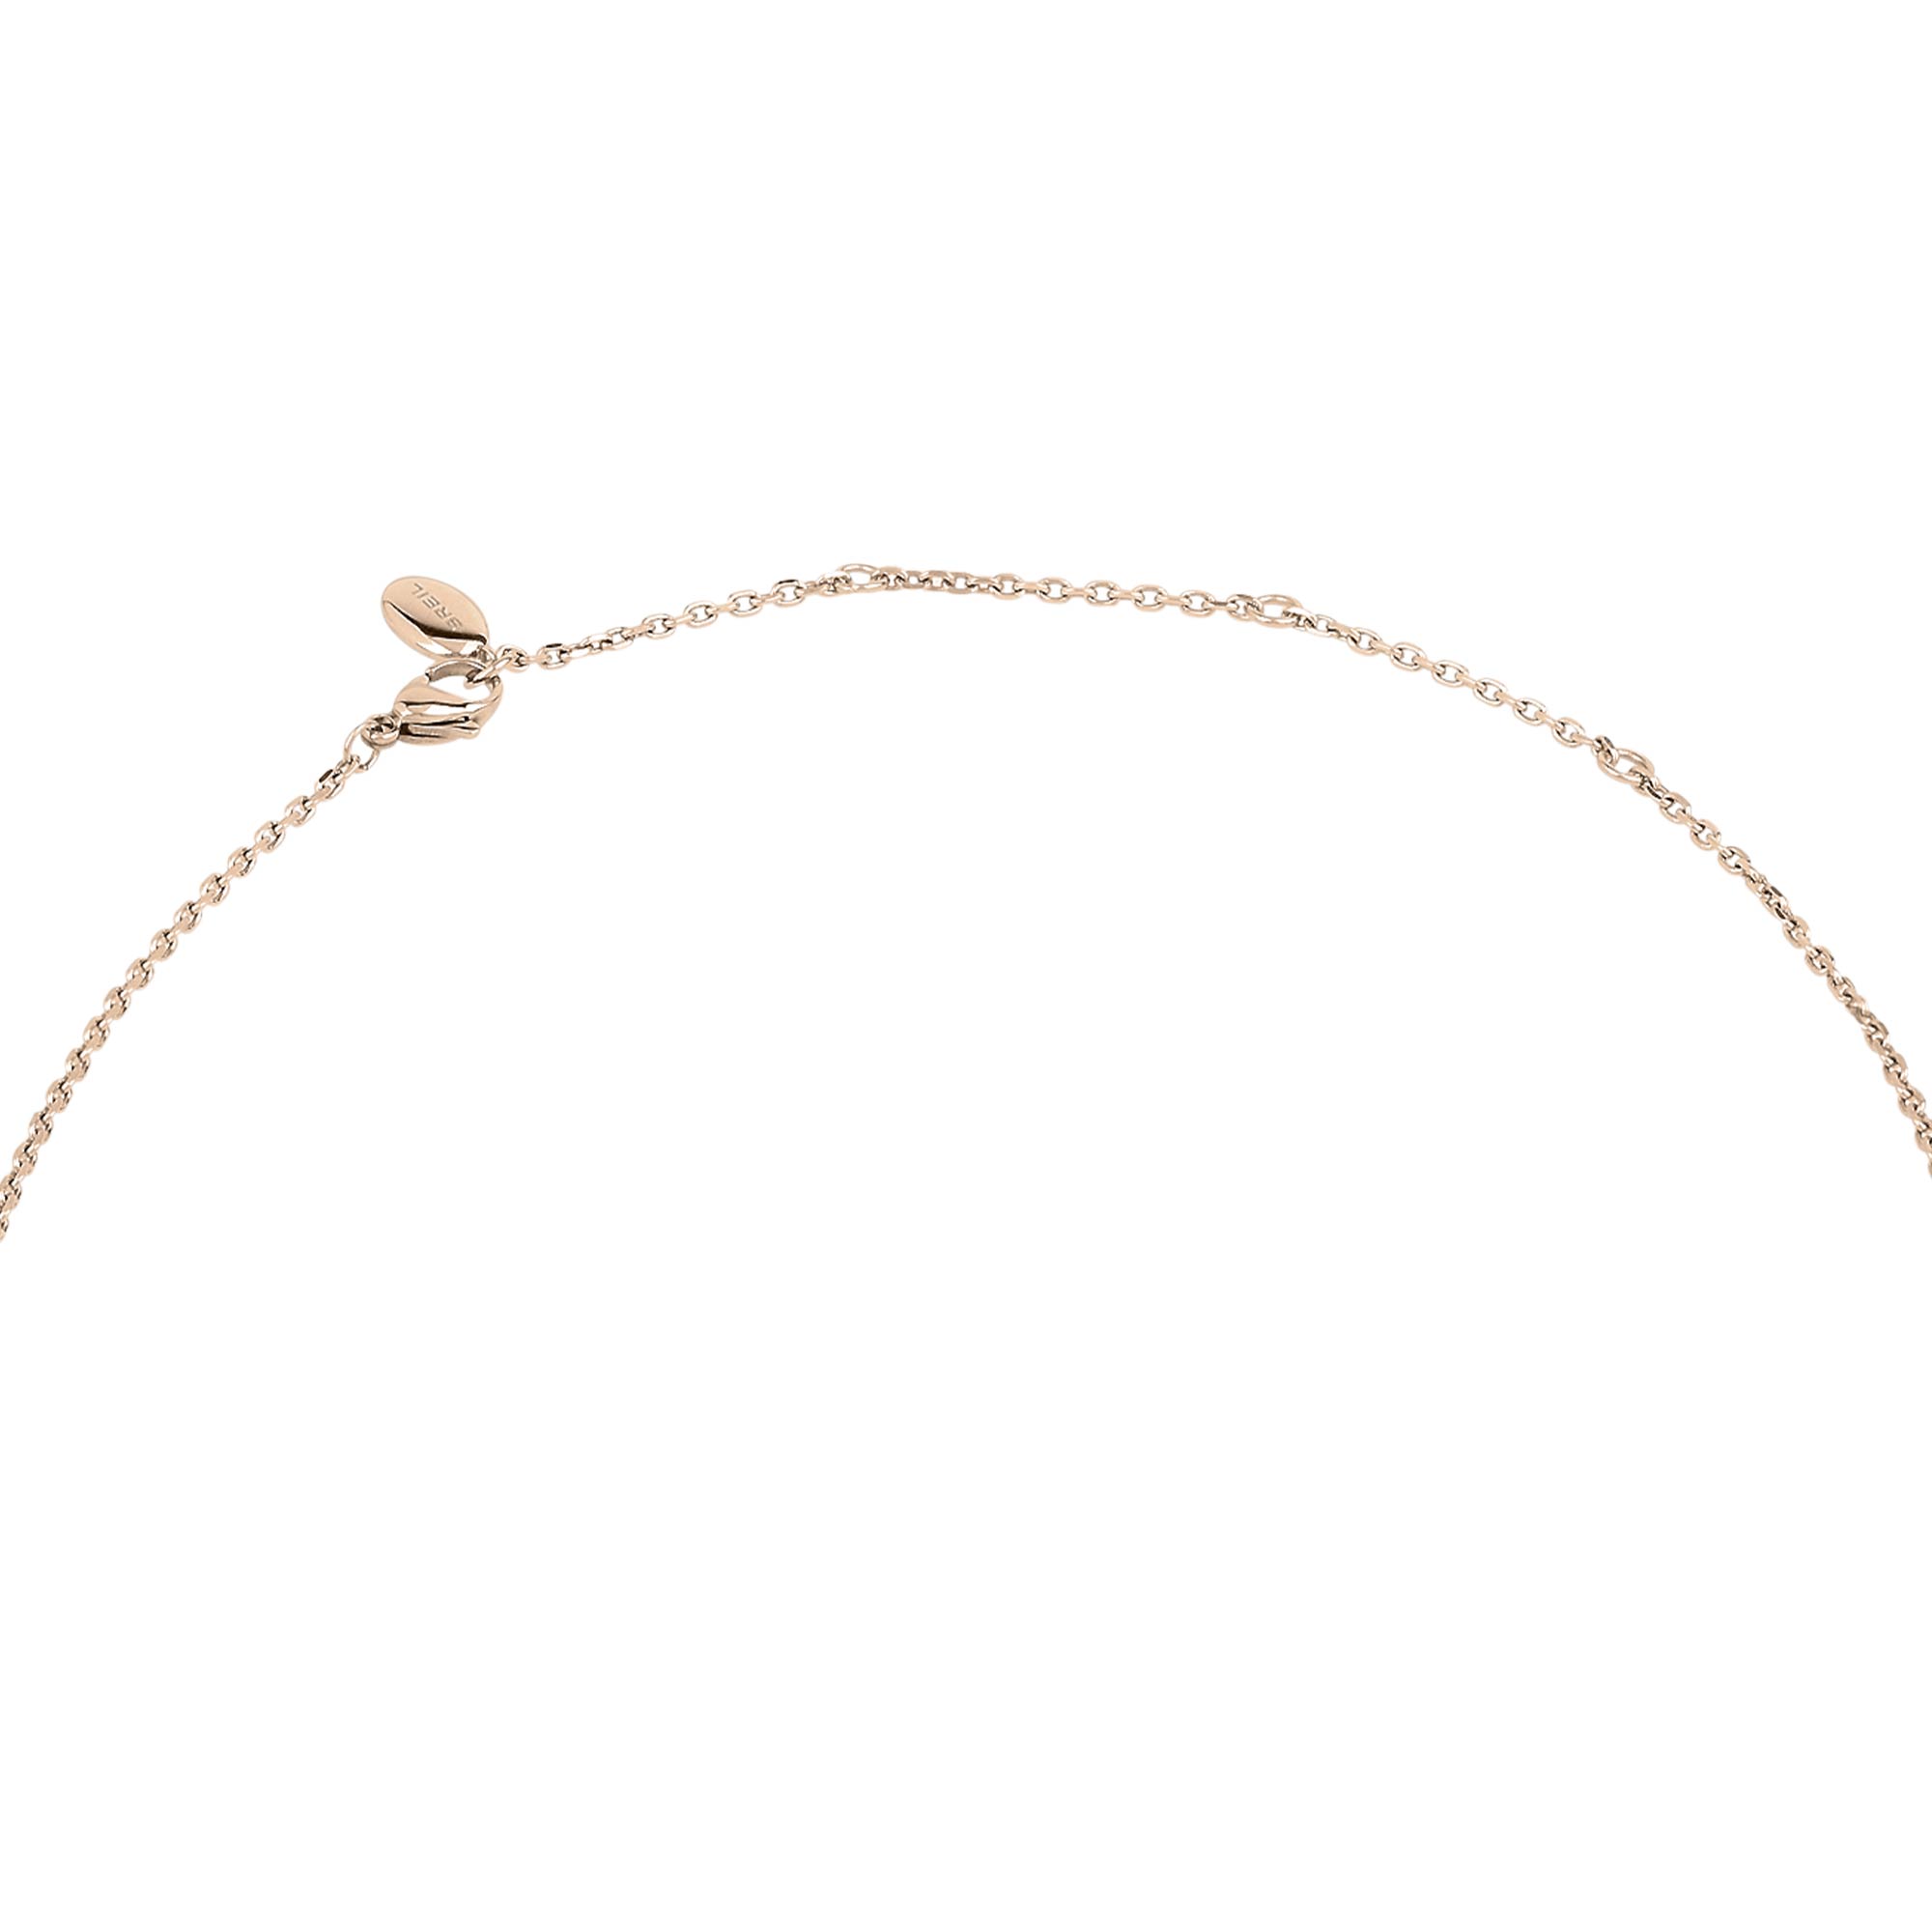 ILLUSION - SATIN IP ROSE STAINLESS STEEL NECKLACE WITH DROP SHAPE PENDANT AND CRYSTALS - 2 - TJ2700 | Breil